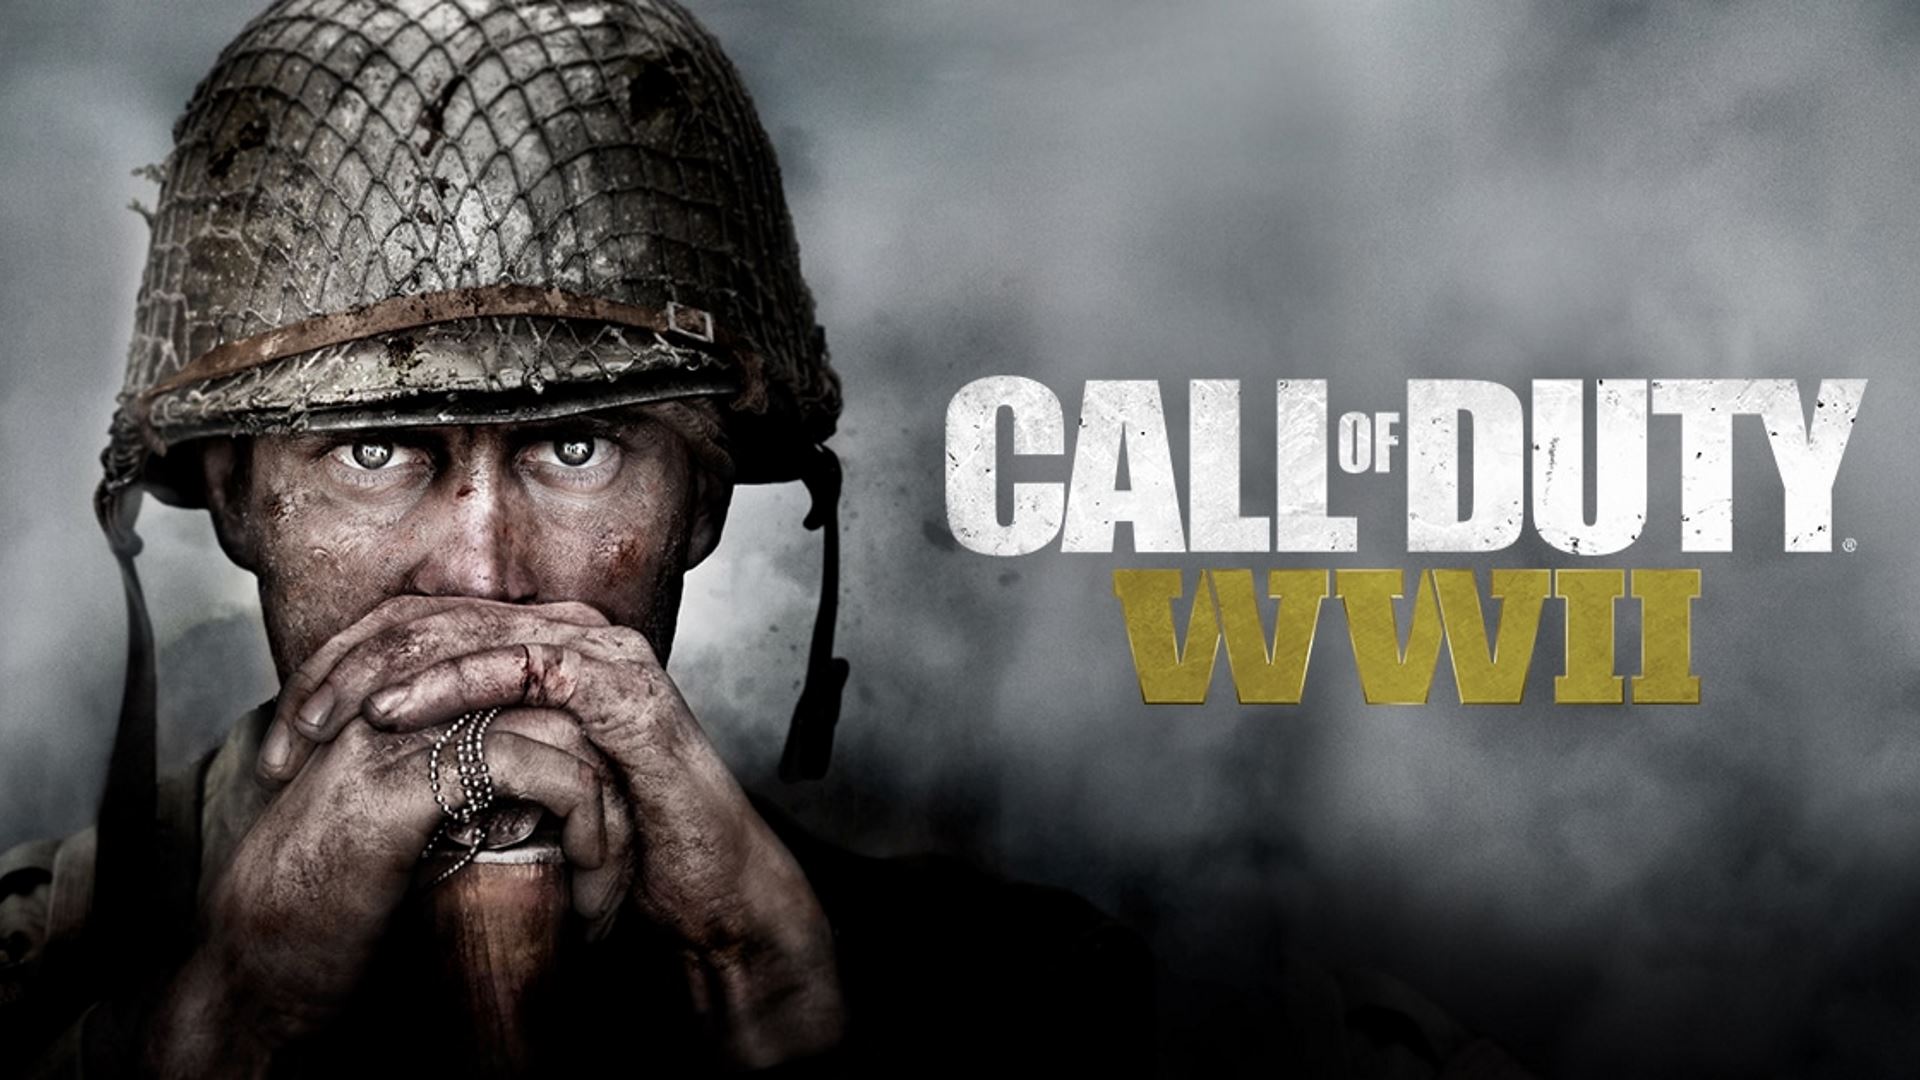 Call of Duty: WWII Content for Australia Altered Due to “Threat of Sexual Violence”